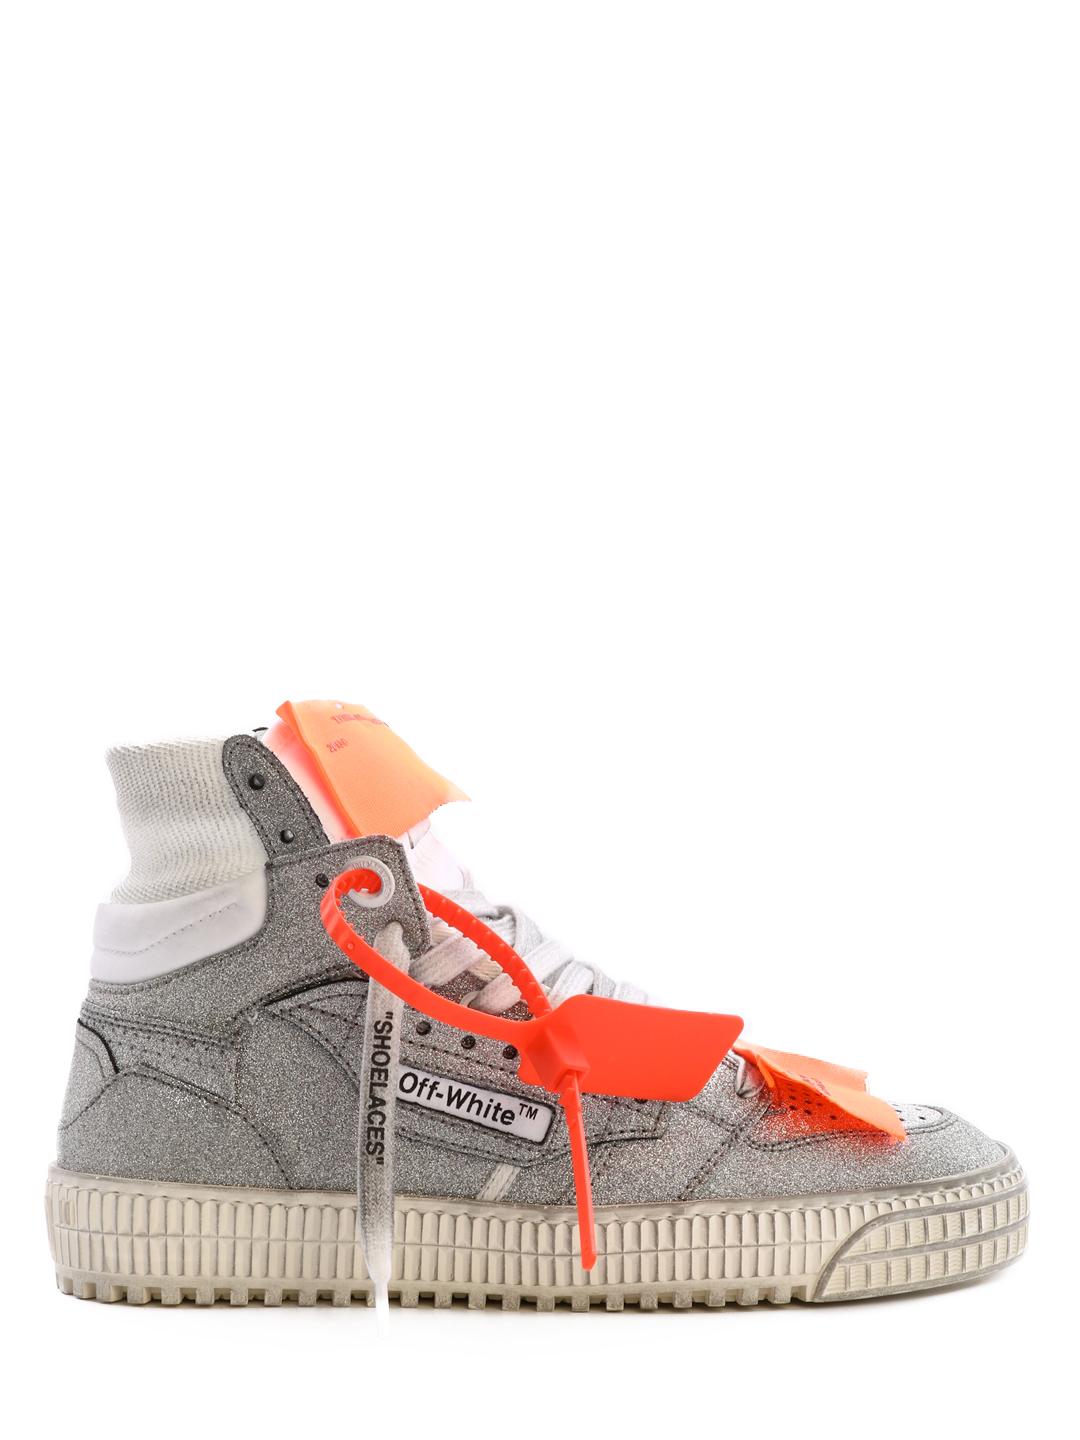 Off-White c/o Virgil Abloh Leather Off-court 3.0 Glitter Sneakers in ...